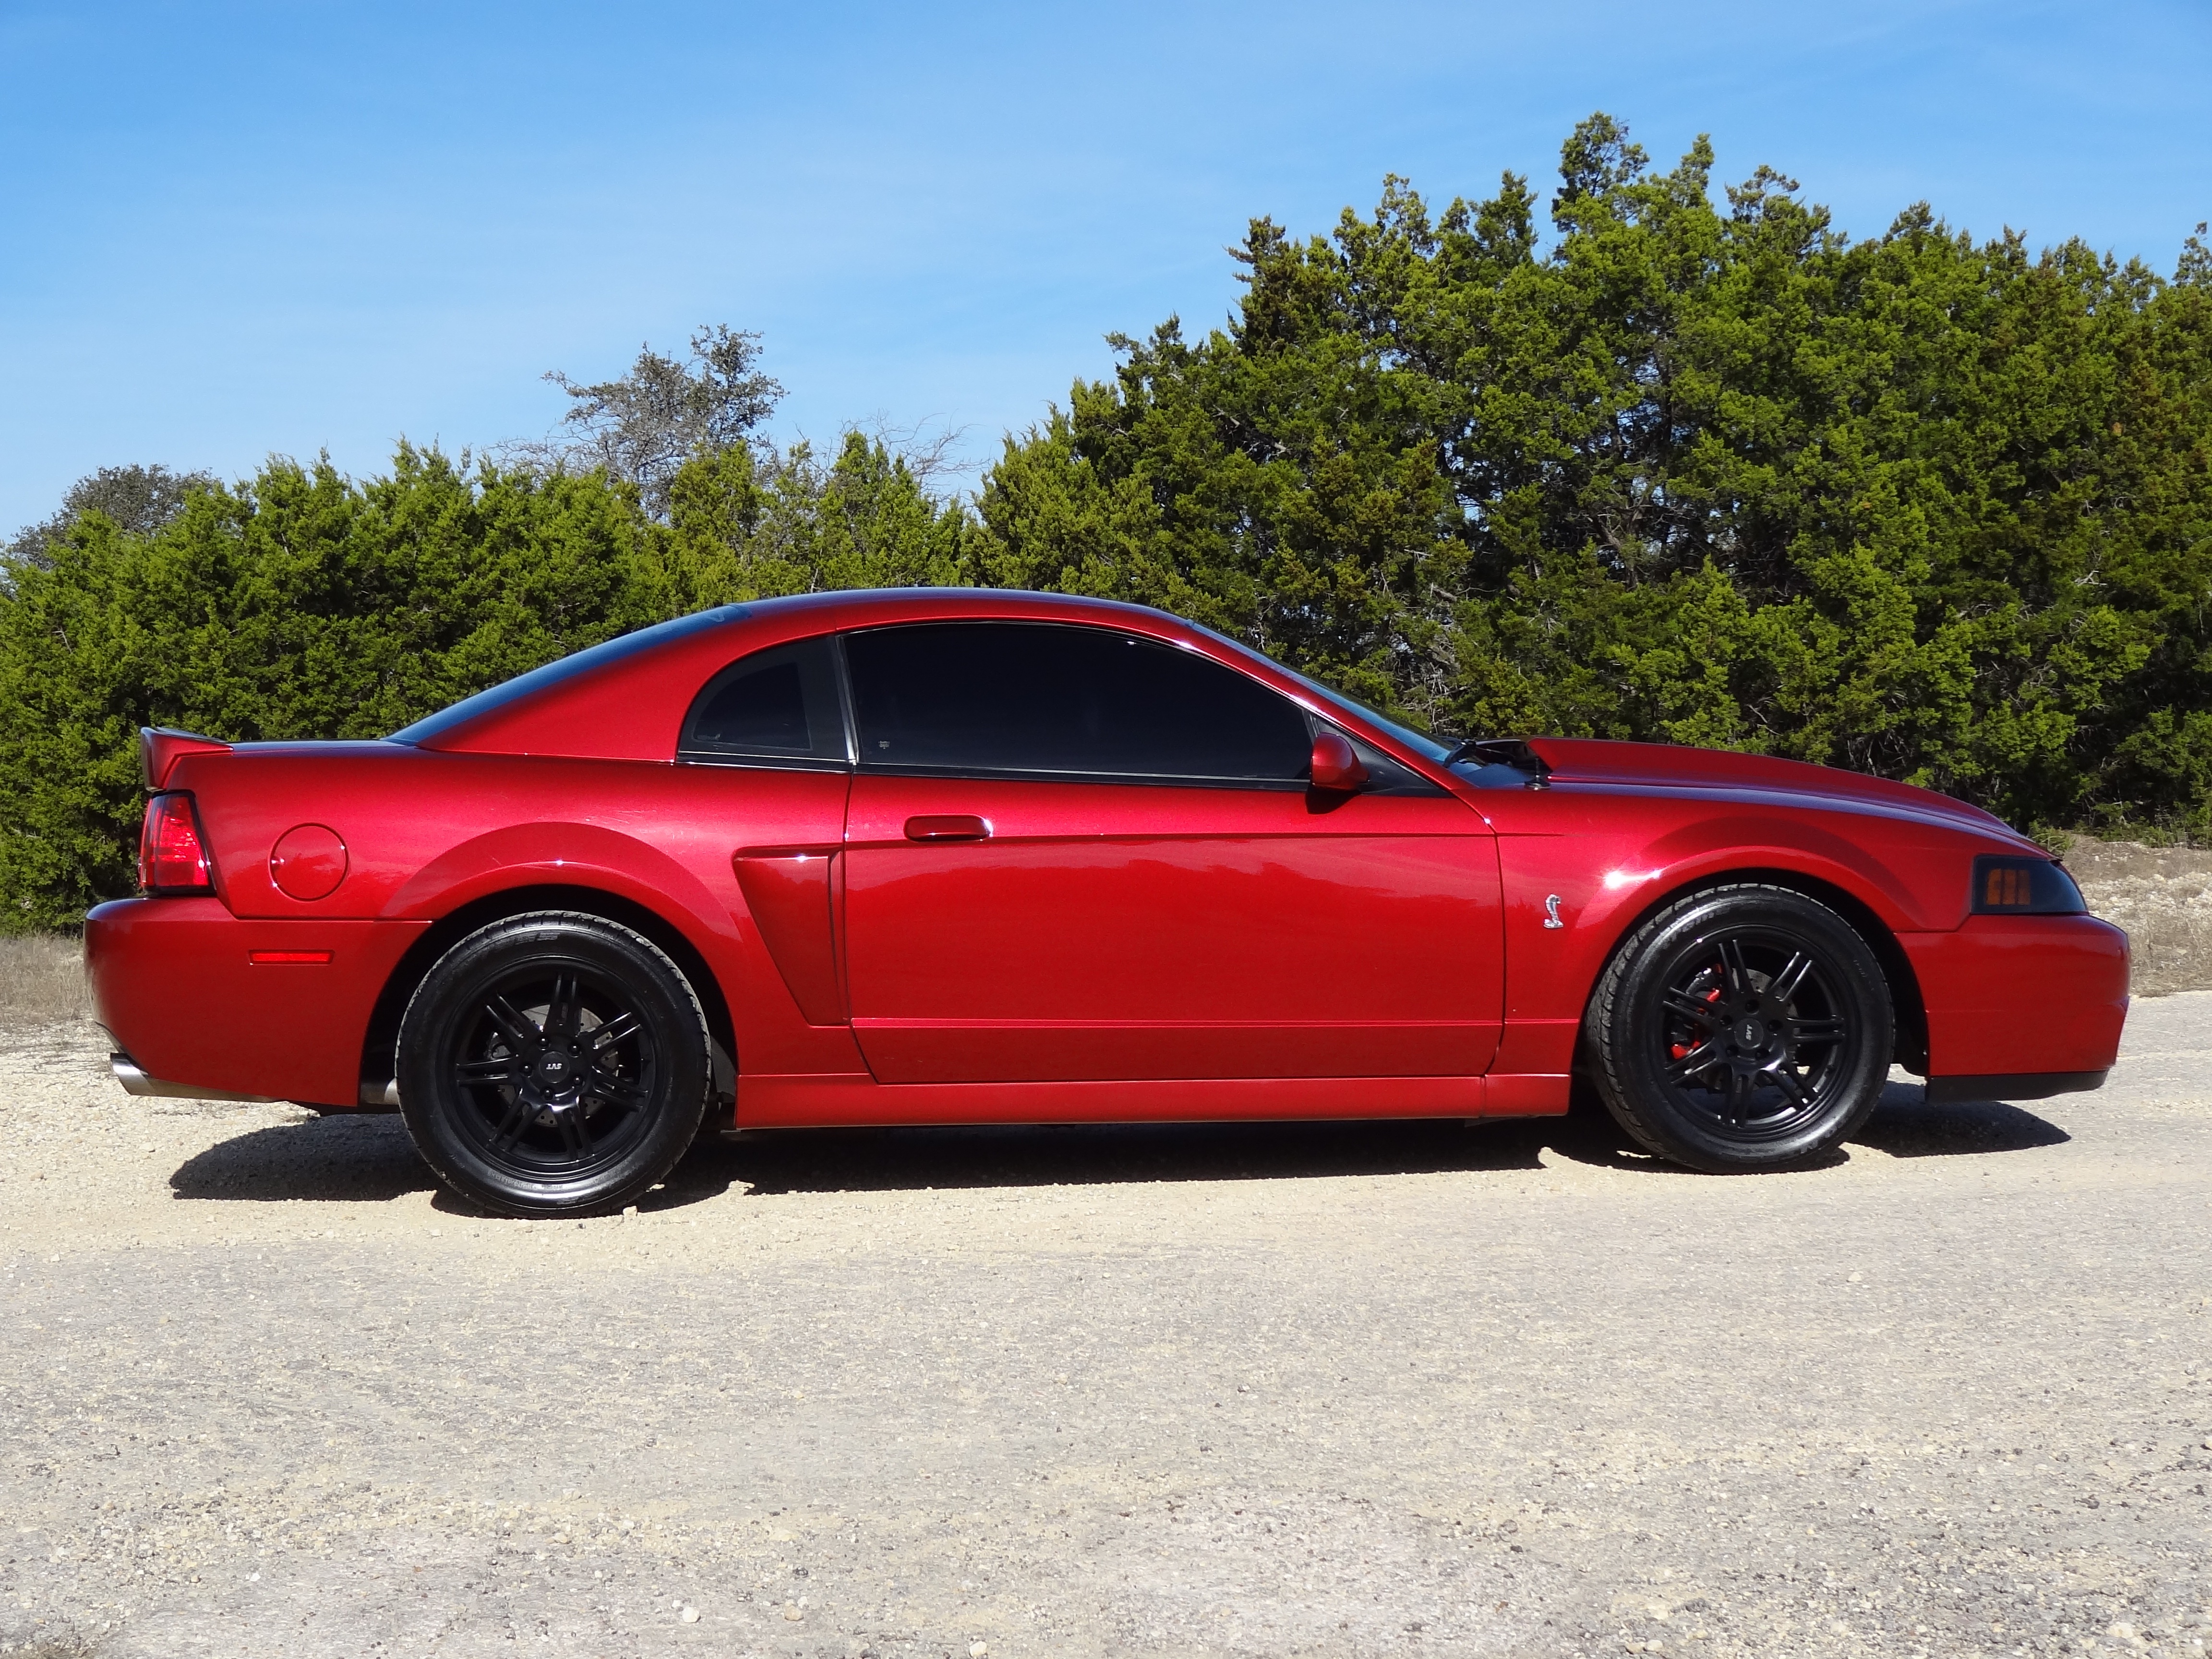 Vehicles 2003 Ford Mustang Cobra HD Wallpaper | Background Image